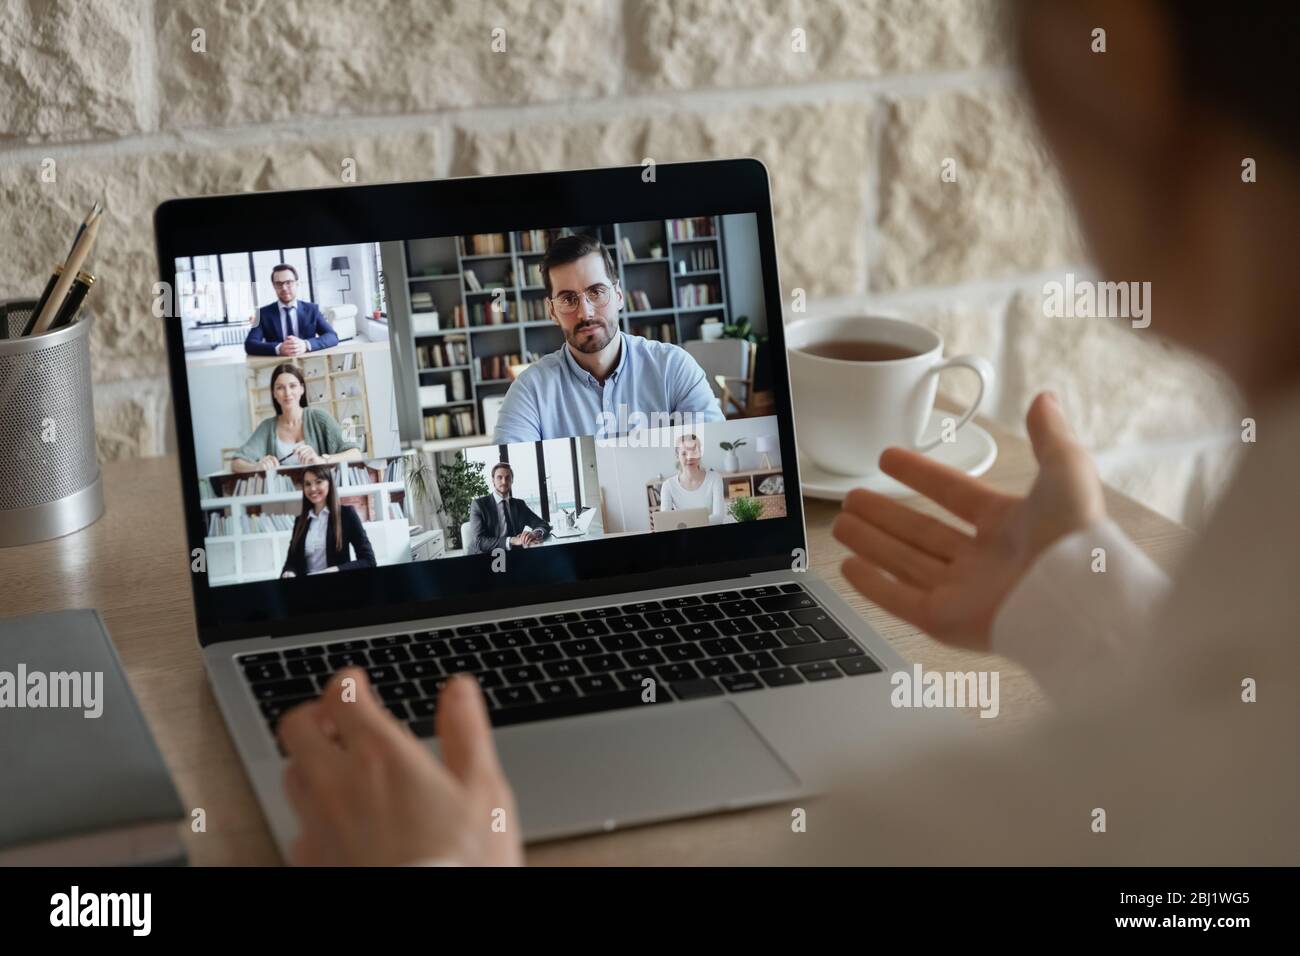 Businesspeople have online webcam conference discussing ideas Stock Photo